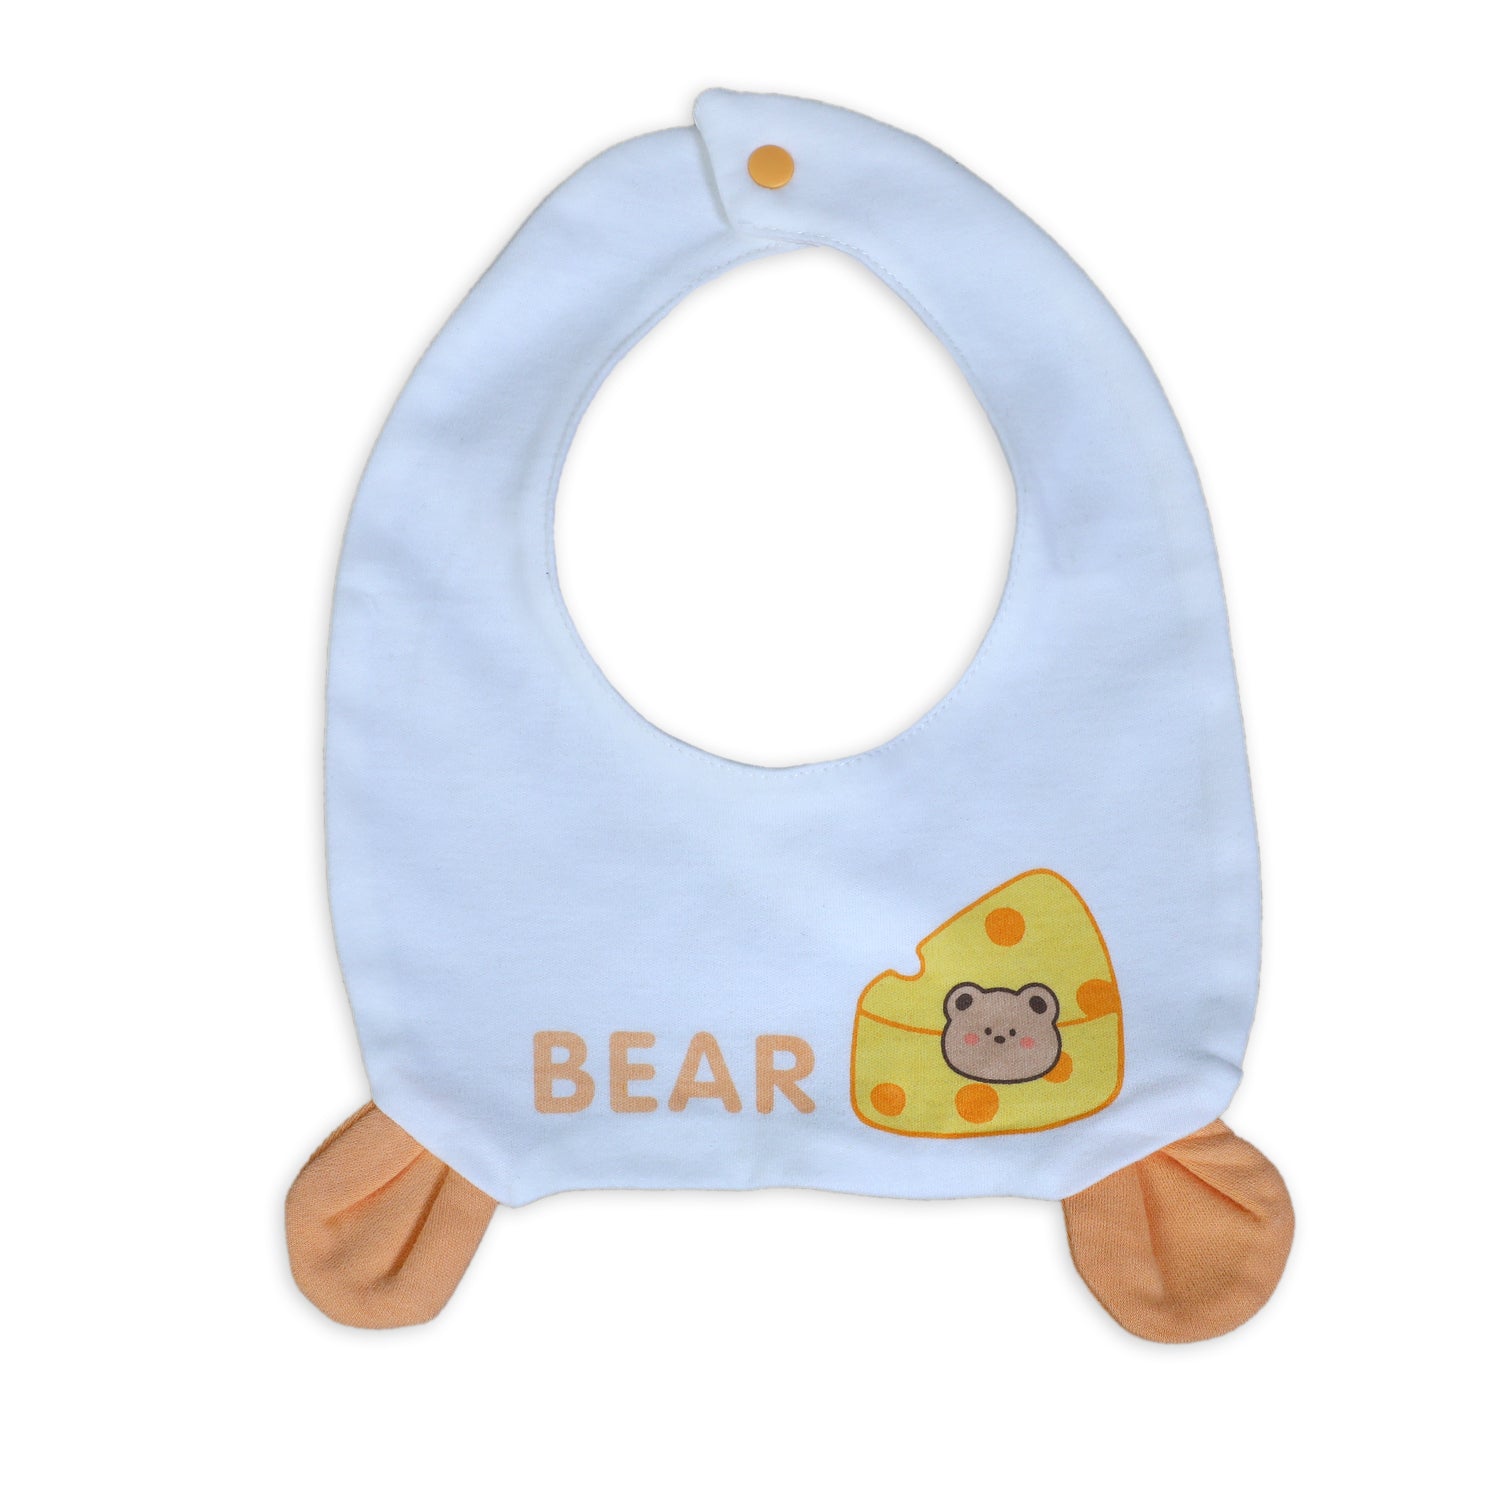 Cute Bear Full Sleeves One-Piece Body Suit With Snap Buttons Tie Knot And Matching Bib - Orange - Baby Moo